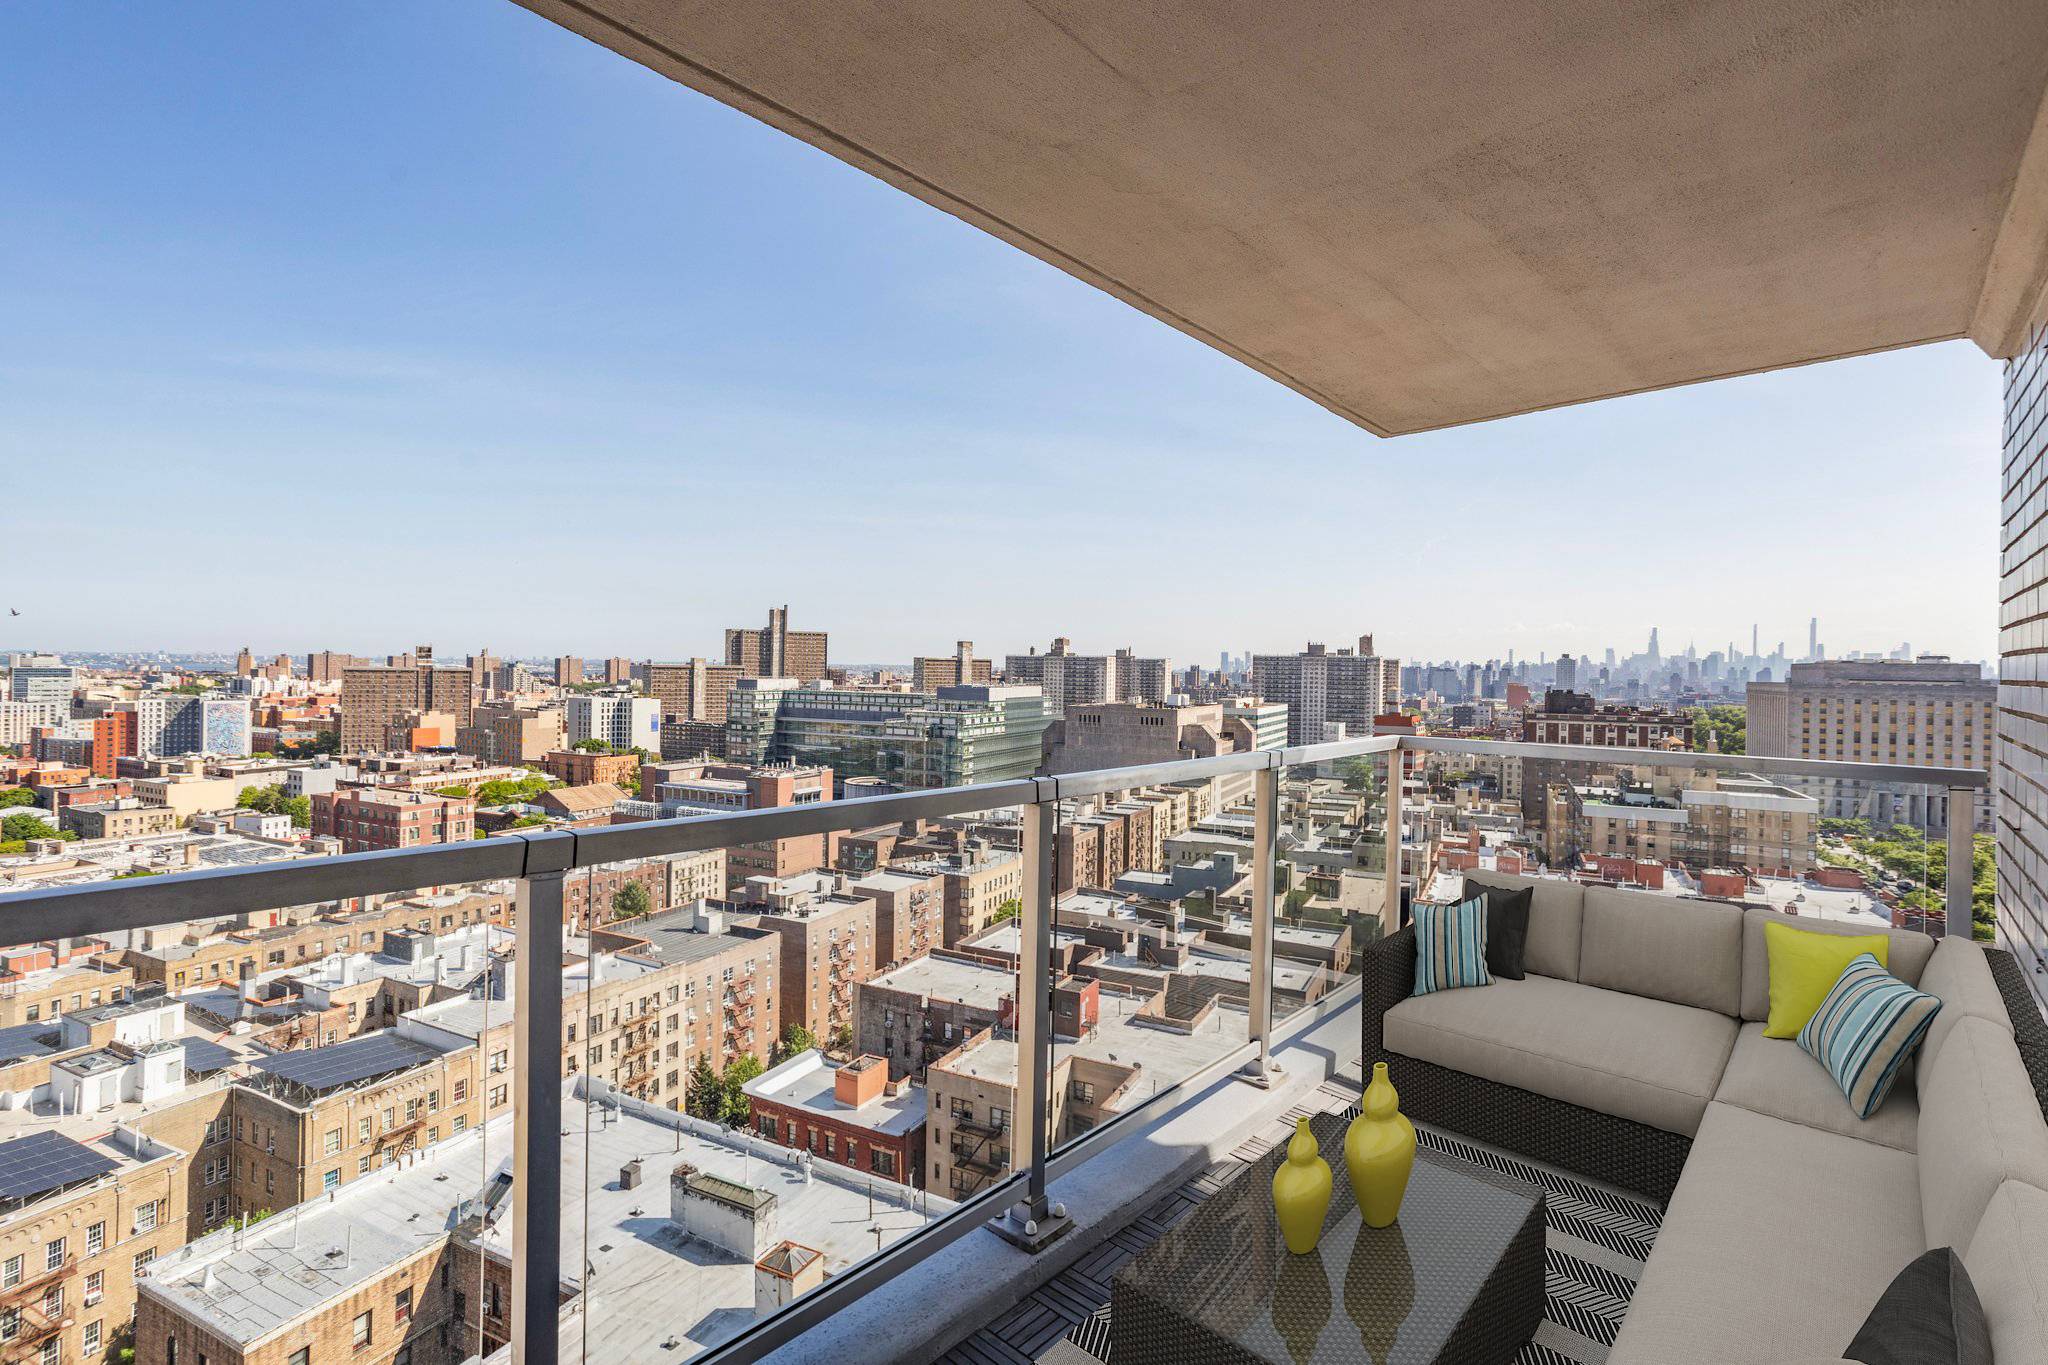 Enjoy sweeping views of the Manhattan Skyline, Yankee Stadium and the South Bronx from your private balcony on the 20th floor of the Grand Concourse s premier luxury cooperative building.